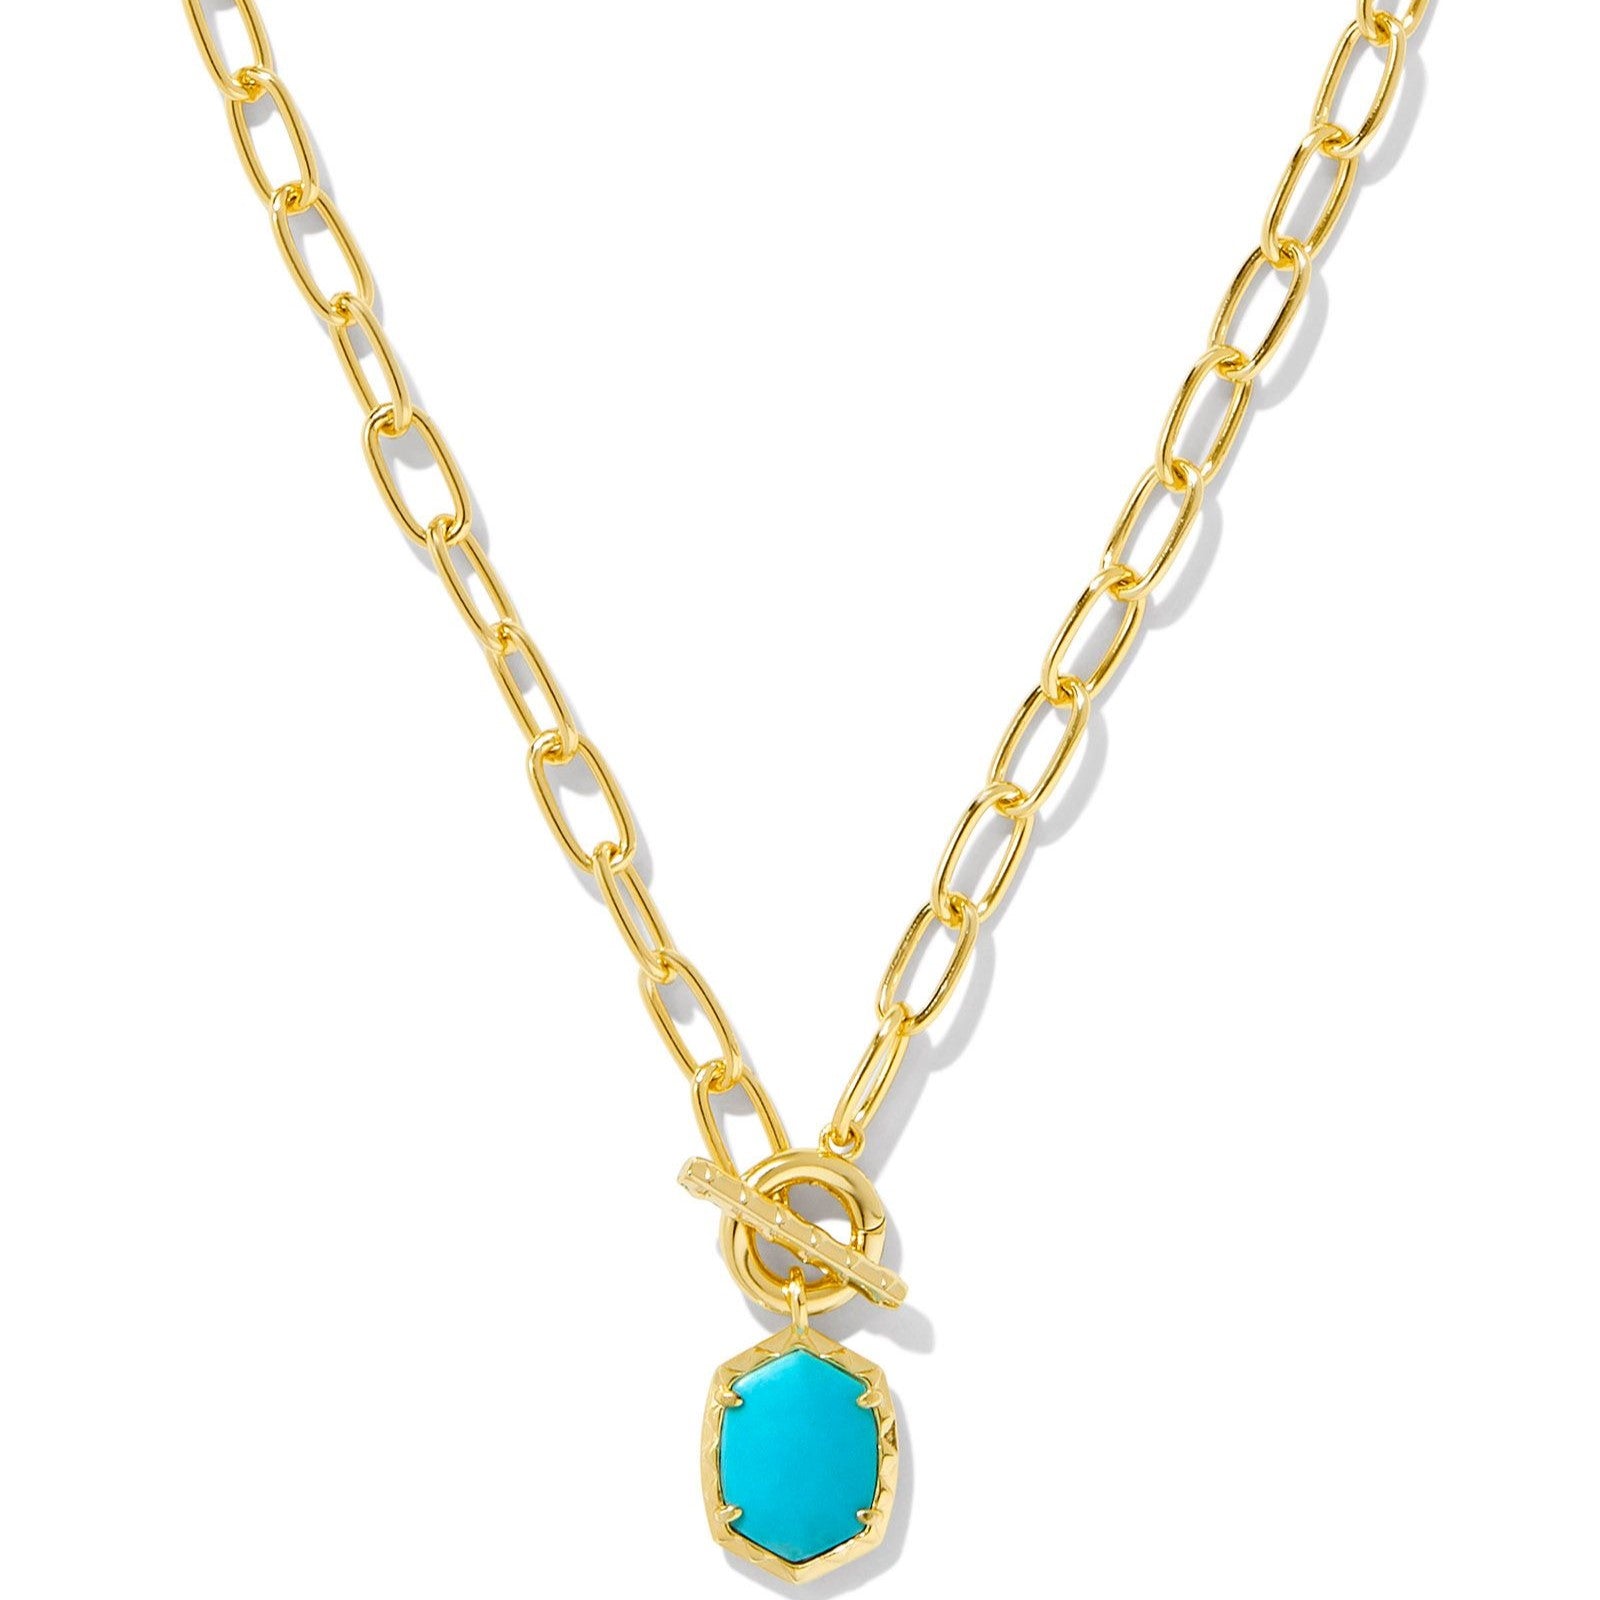 Kendra Scott | Daphne Gold Link and Chain Necklace in Variegated Turquoise Magnesite - Giddy Up Glamour Boutique